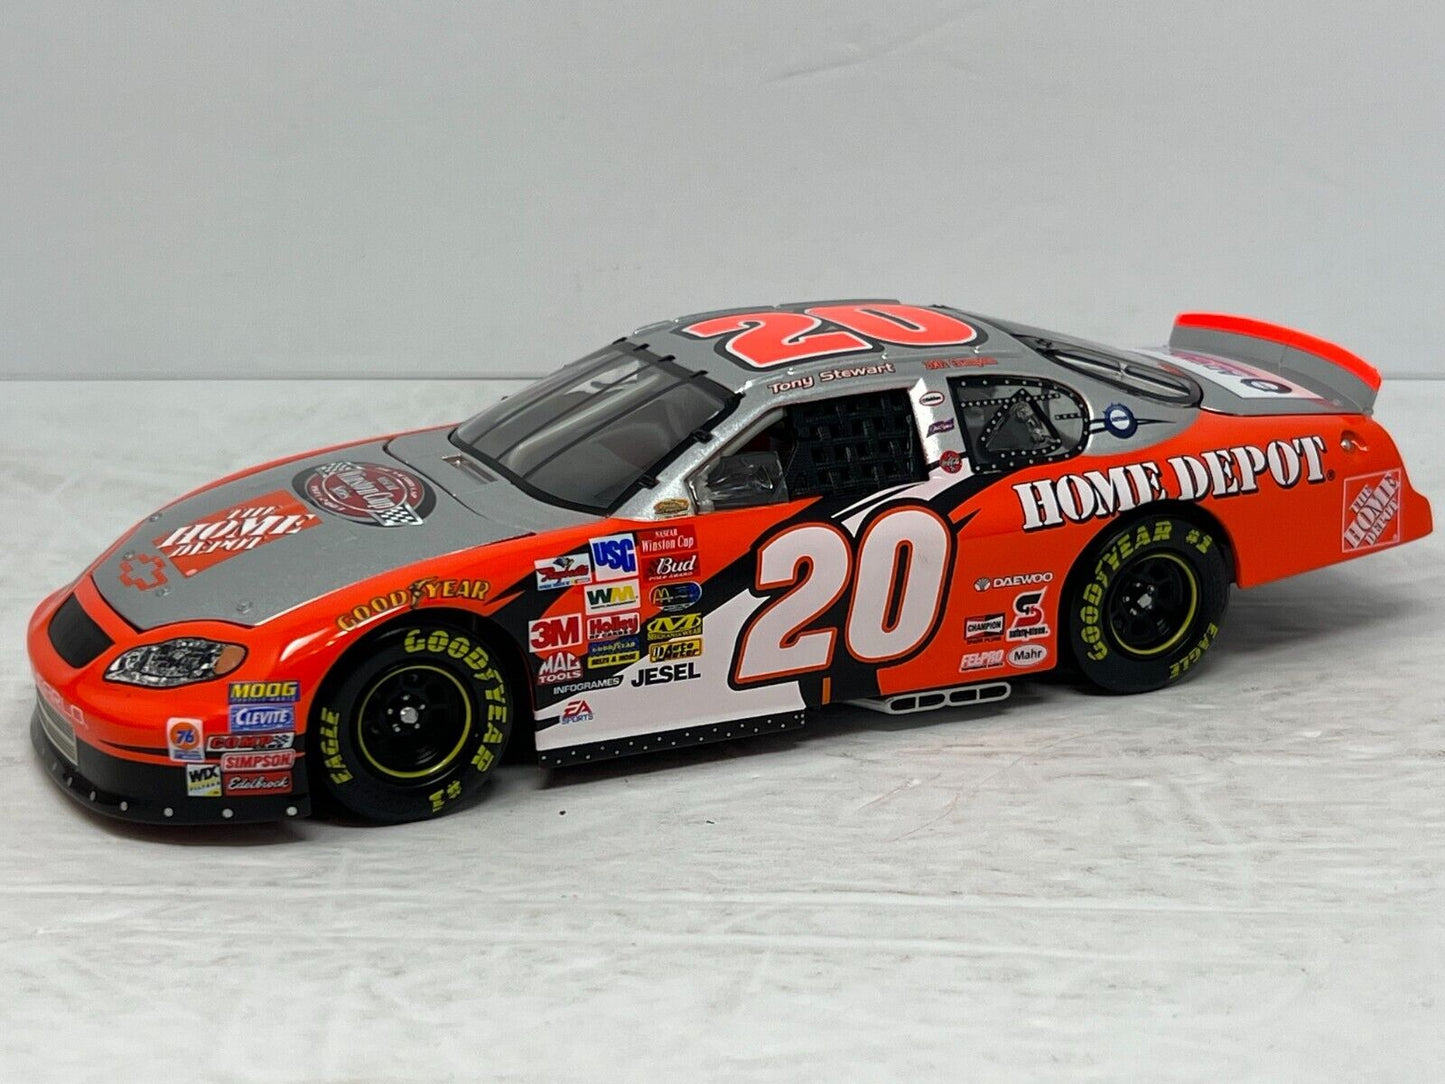 Action Nascar #20 Tony Stewart Home Depot Victory Lap GM Dealers 1:24 Diecast